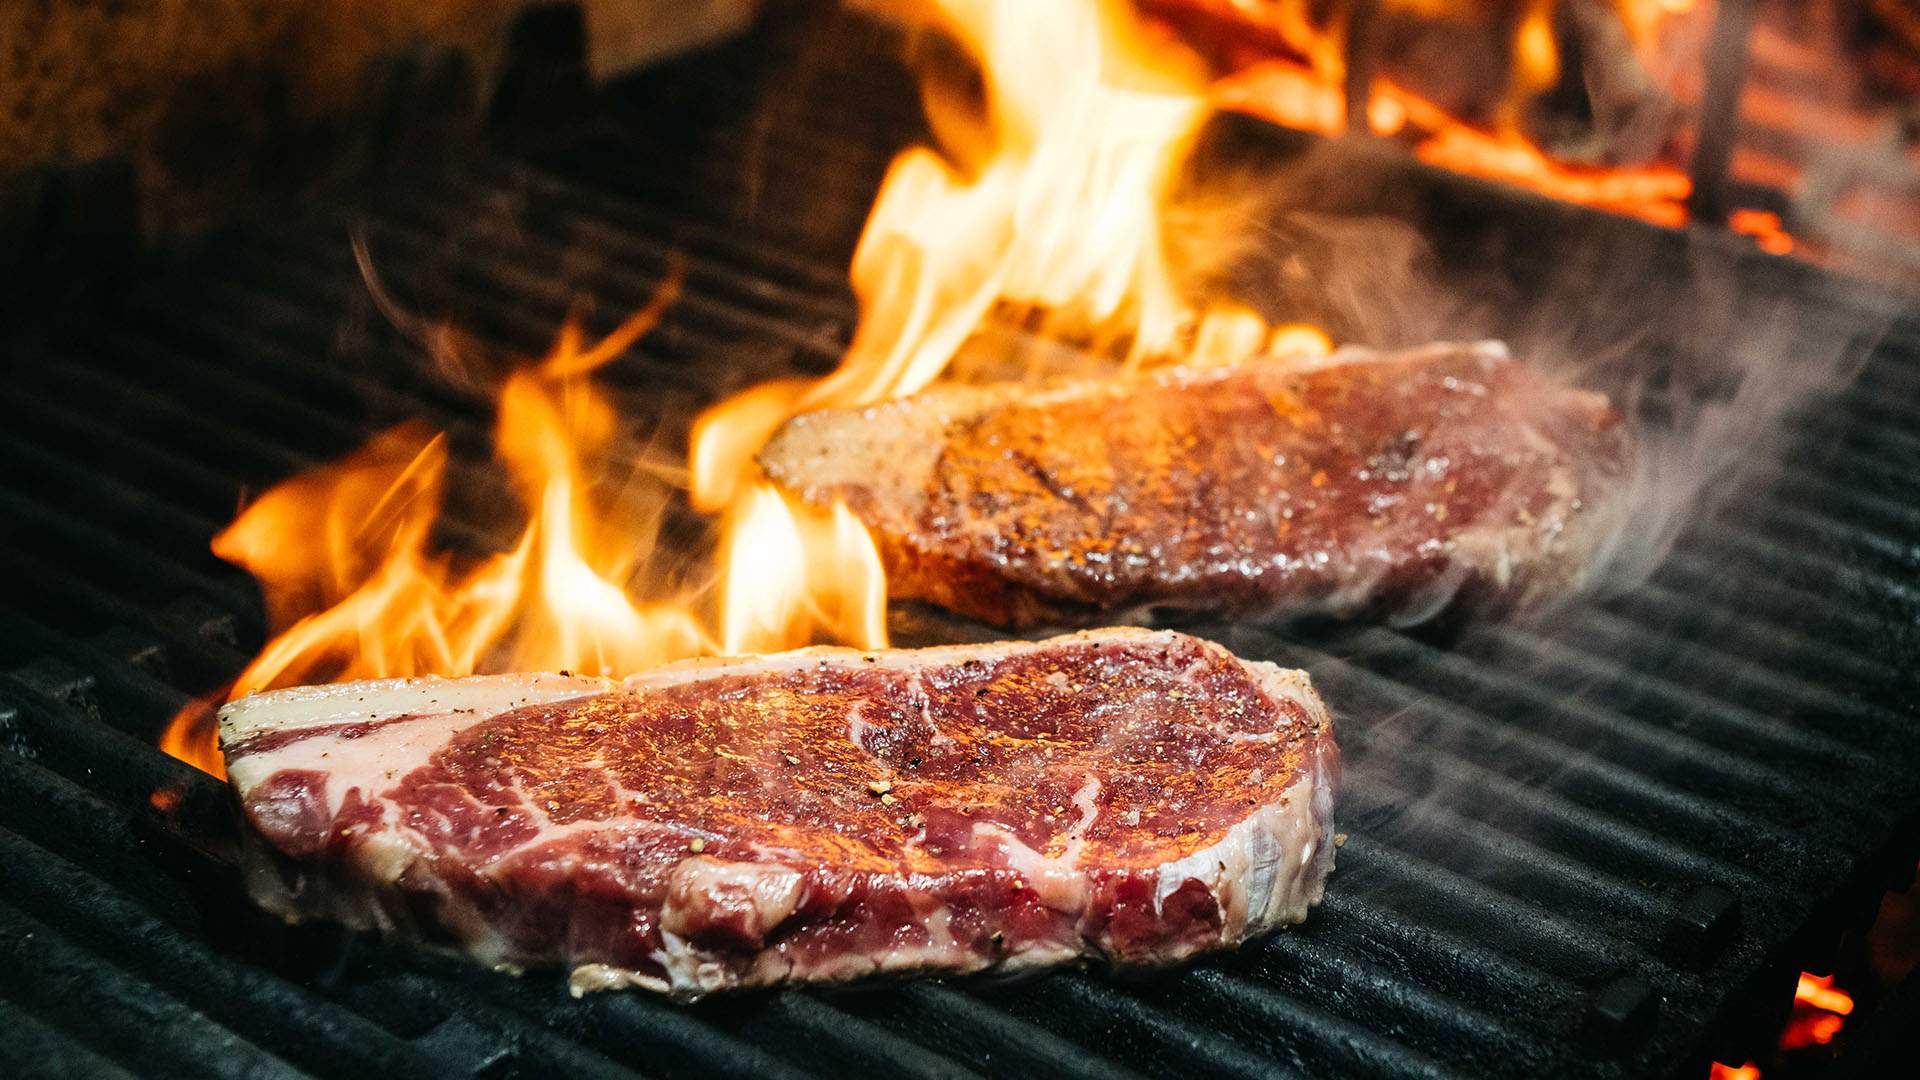 Alfie's Is the No-Fuss Steakhouse Coming to the CBD From the Bistecca Team This Spring